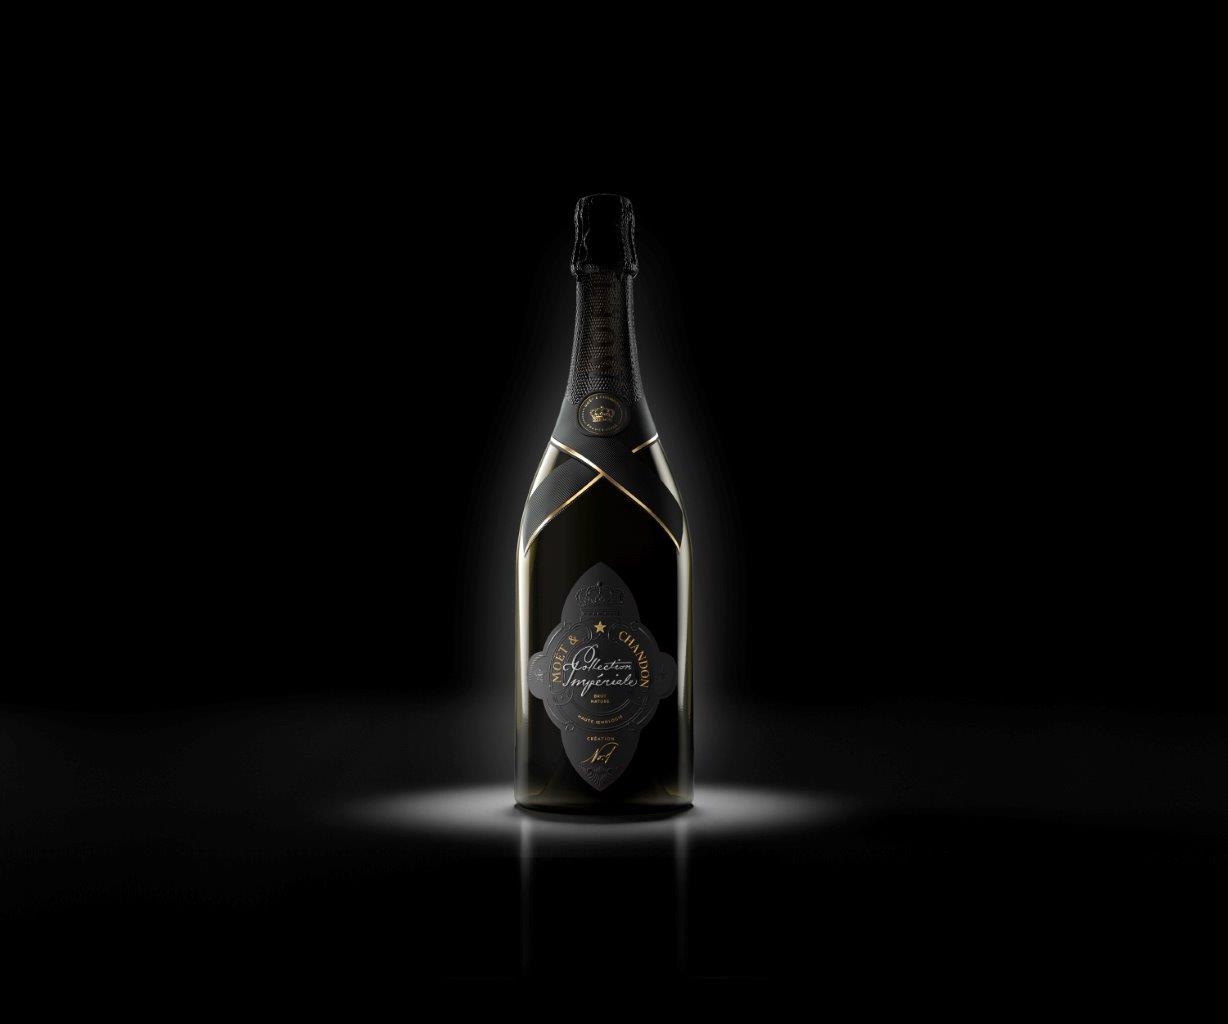 Collection Impériale Création No. 1: The Newest Expression of Moët & Chandon’s Founding Vision.